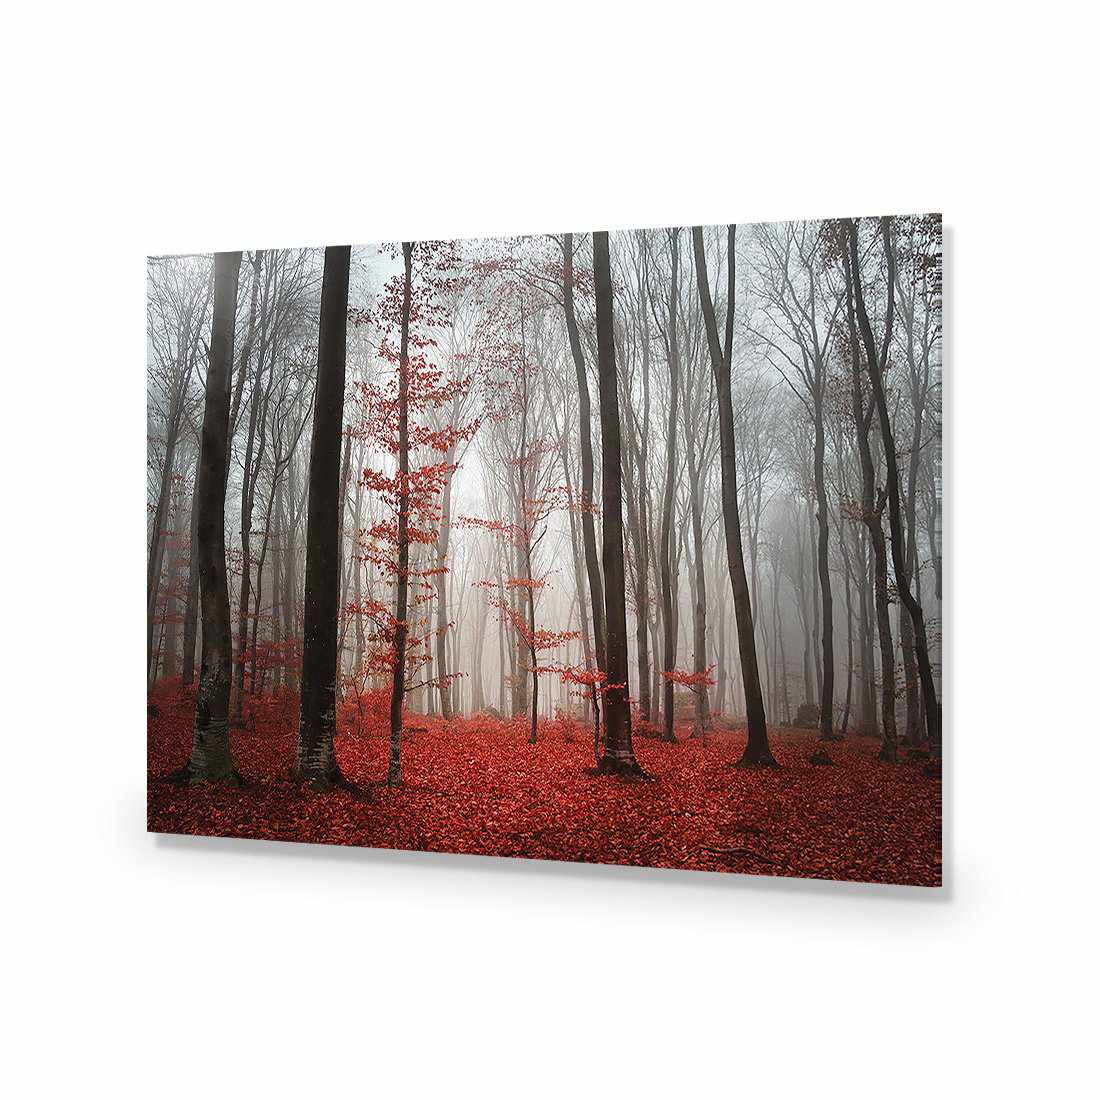 Scarlet Forest-Acrylic-Wall Art Design-Without Border-Acrylic - No Frame-45x30cm-Wall Art Designs